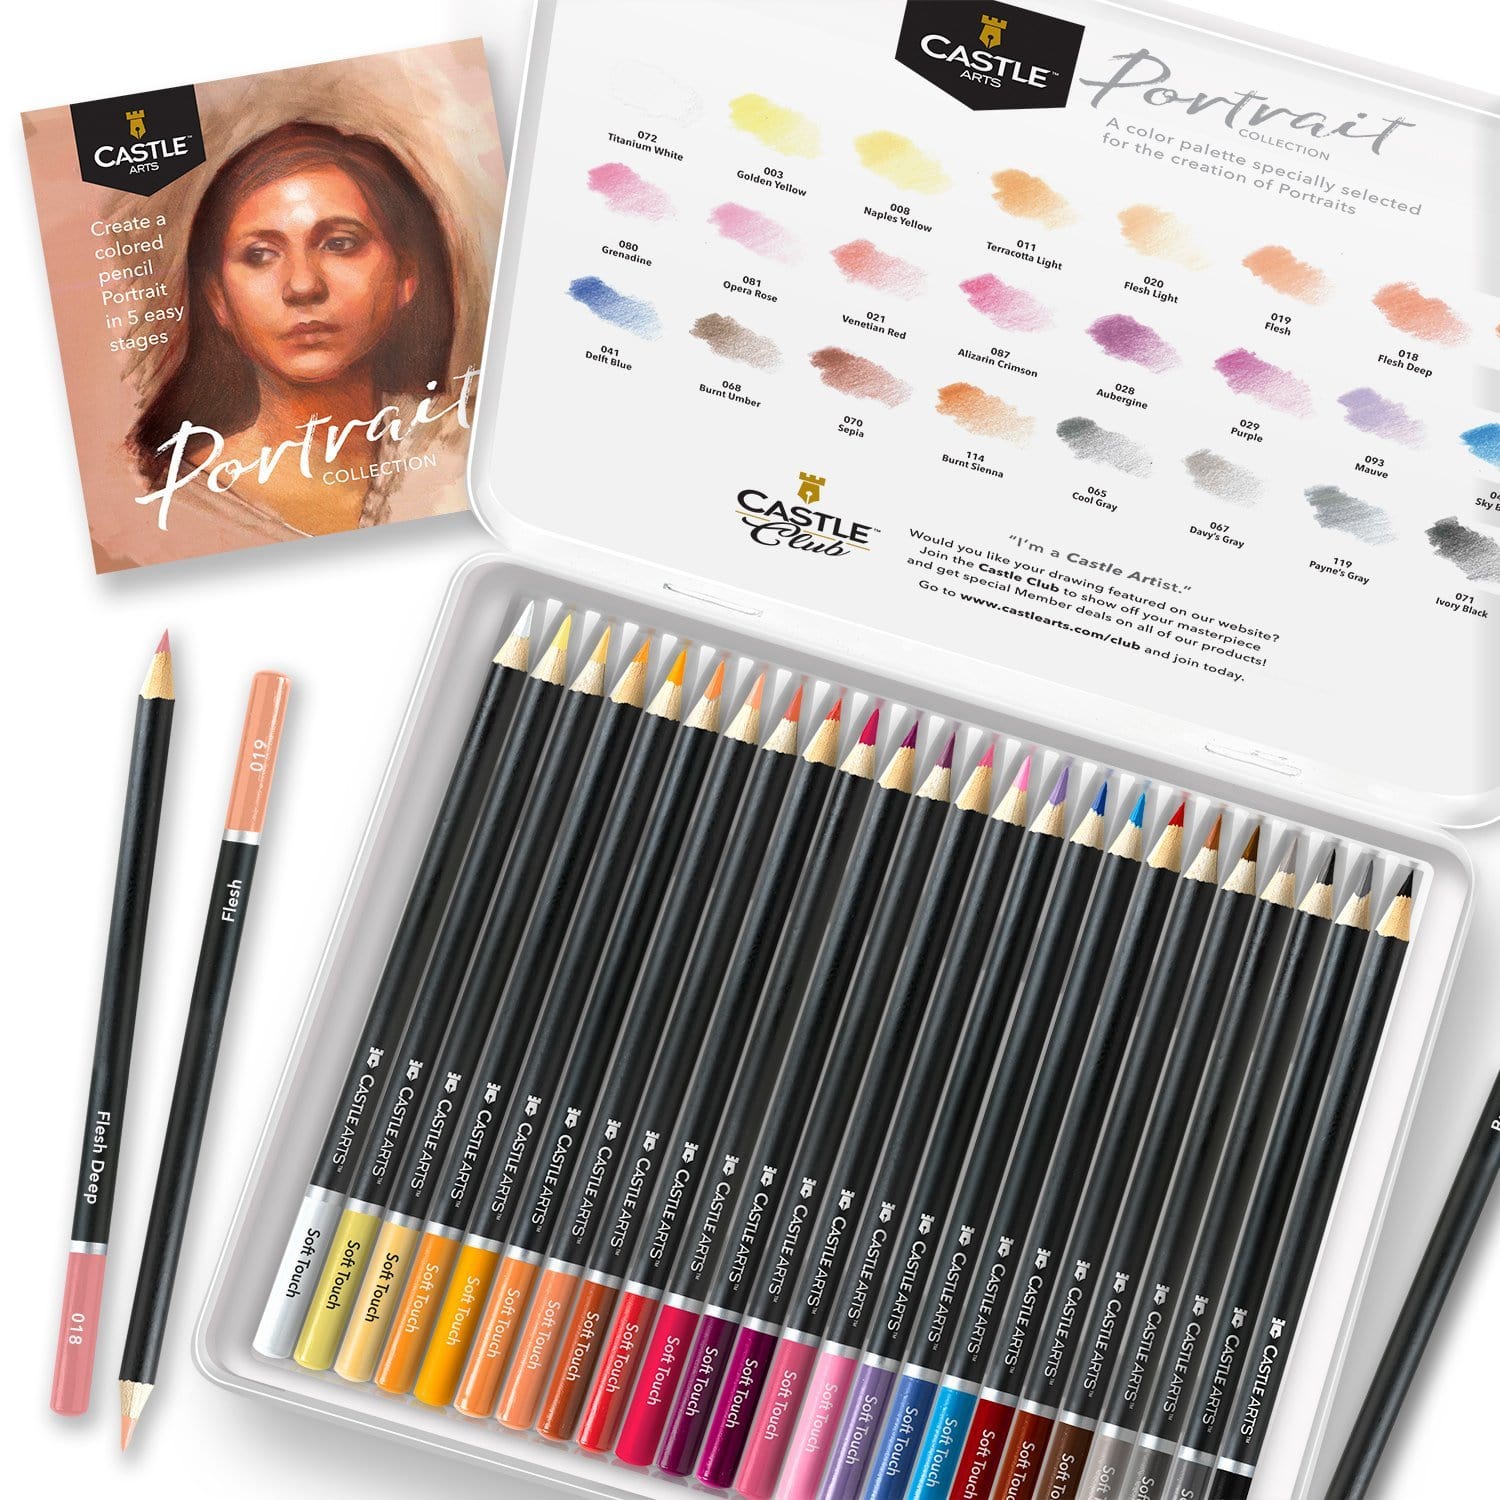 Coloring Skin with Castle Art Pencils 